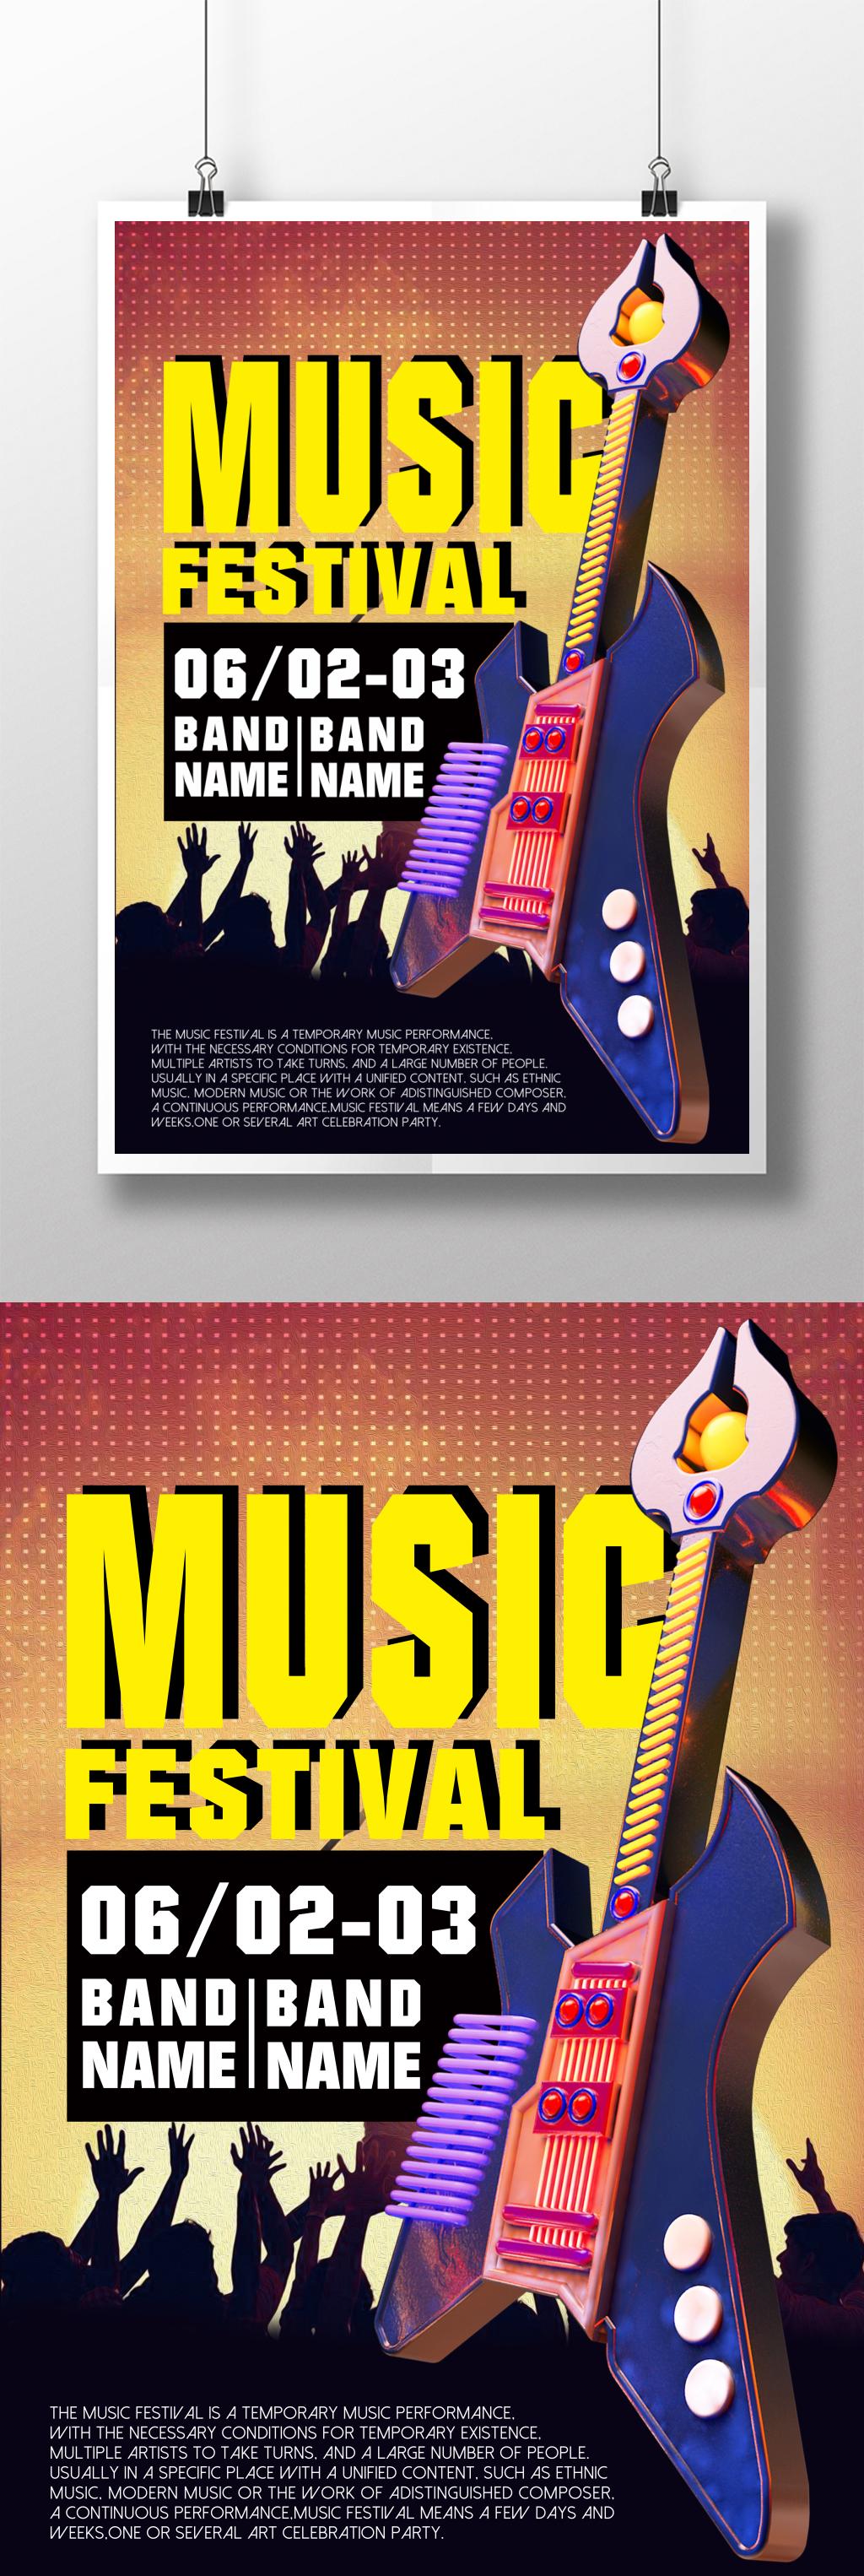 Music festival template image picture free download 450019253 lovepik com